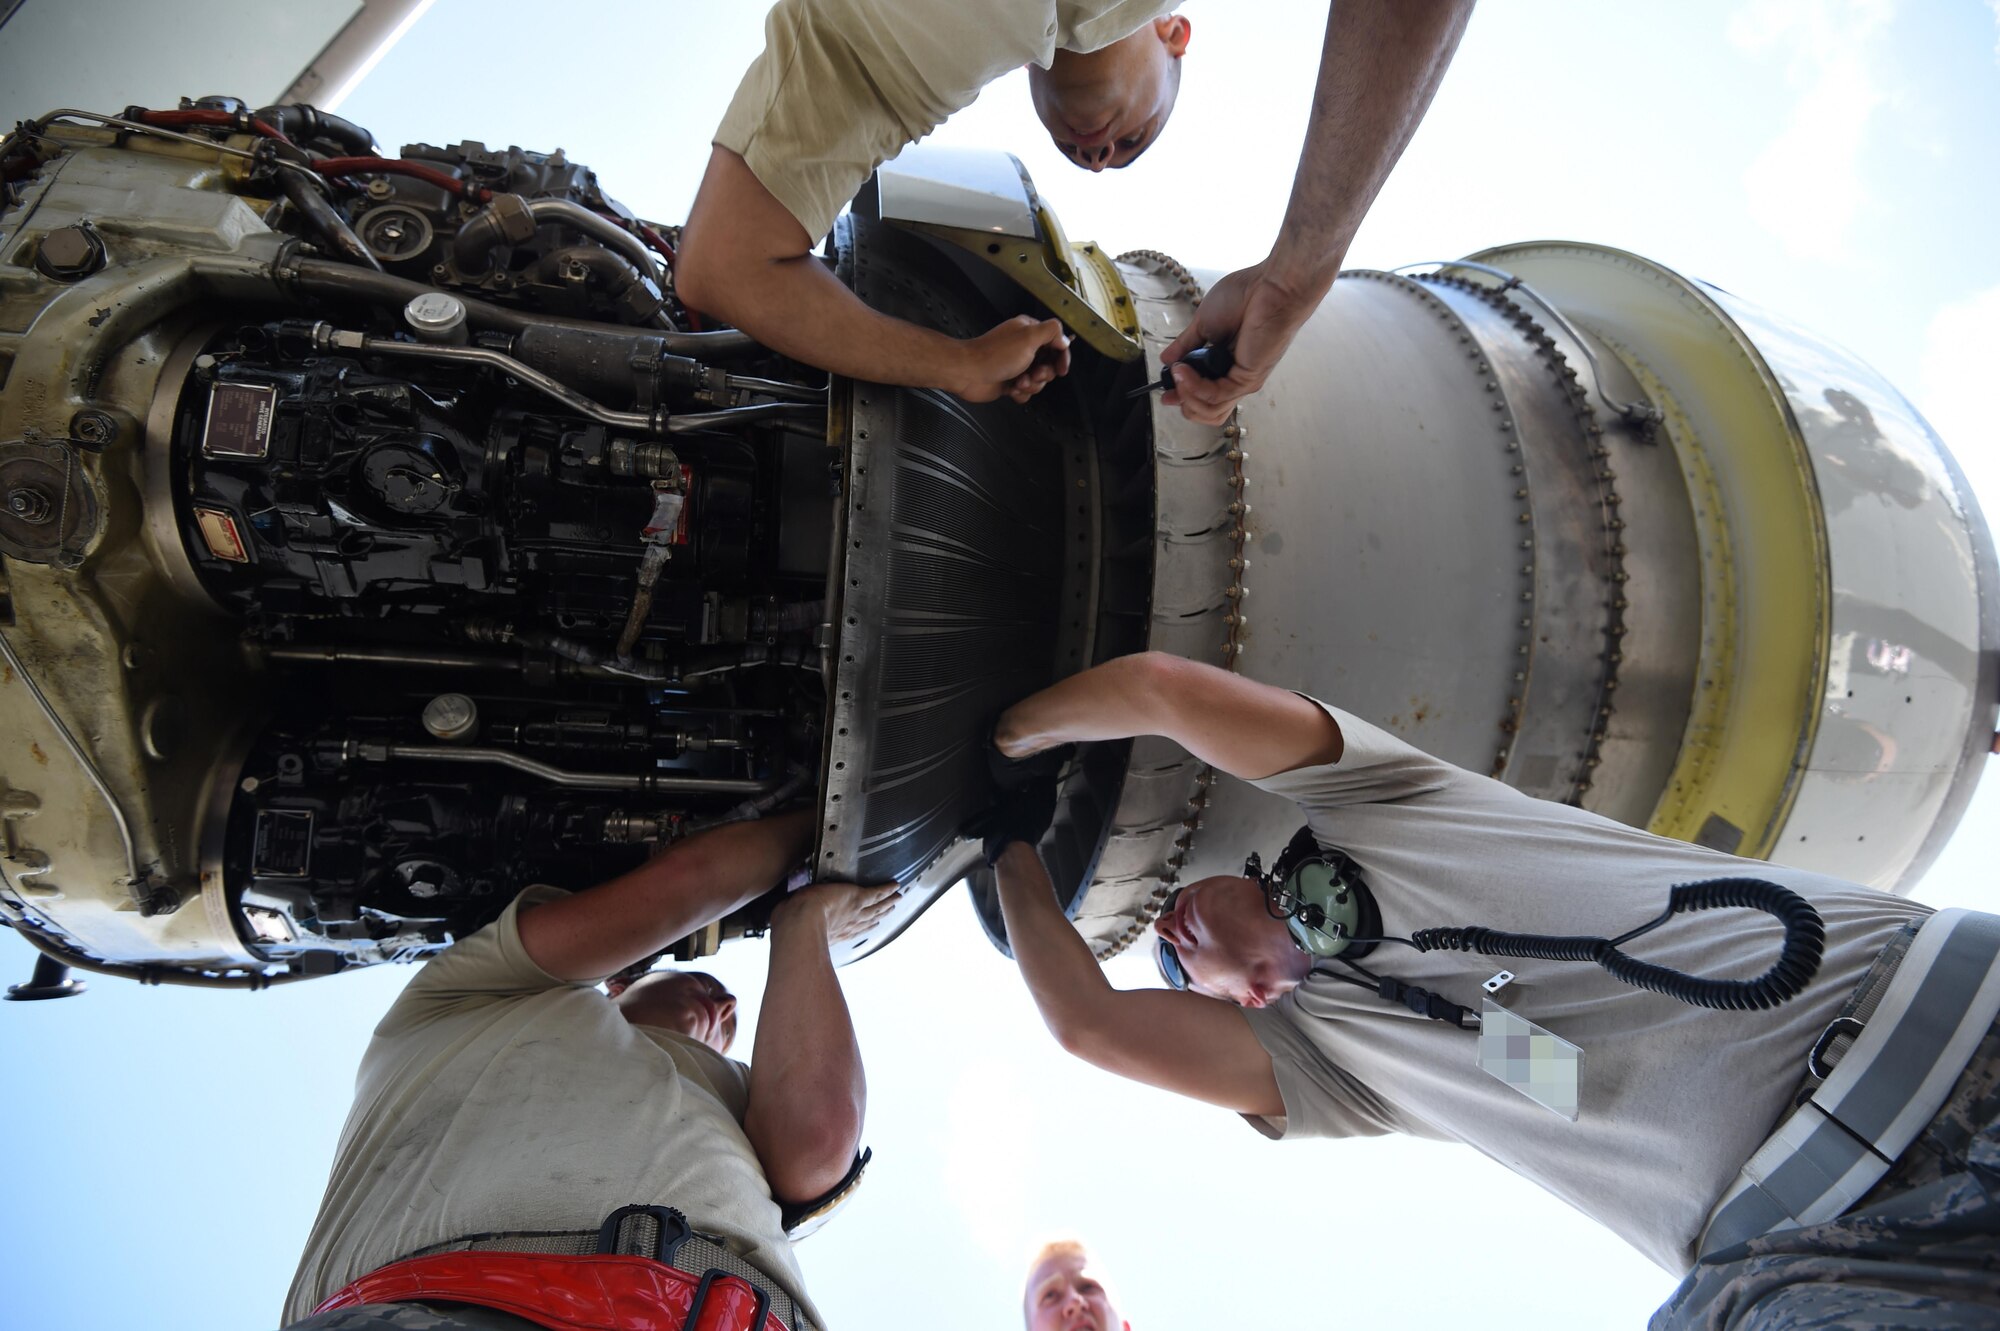 Maintenance Airmen from the 513th Air Control Group and 552nd Air Control Wing replace an engine part on an E-3 Sentry on July 25, 2016, at Joint Base Pearl Harbor-Hickam, Hawaii. More than 125 Airmen from the 513th Air Control Group and 552nd Air Control Wing are deployed to Hawaii in support of the Rim of the Pacific 2016 exercise. Twenty-six nations, more than 40 ships and submarines, more than 200 aircraft and 25,000 personnel are participating in RIMPAC from June 30 to Aug. 4, in and around the Hawaiian Islands and Southern California. The world's largest international maritime exercise, RIMPAC provides a unique training opportunity that helps participants foster and sustain the cooperative relationships that are critical to ensuring the safety of sea lanes and security on the world's oceans. RIMPAC 2016 is the 25th exercise in the series that began in 1971. (U.S. Air Force photo by 2nd Lt. Caleb Wanzer)